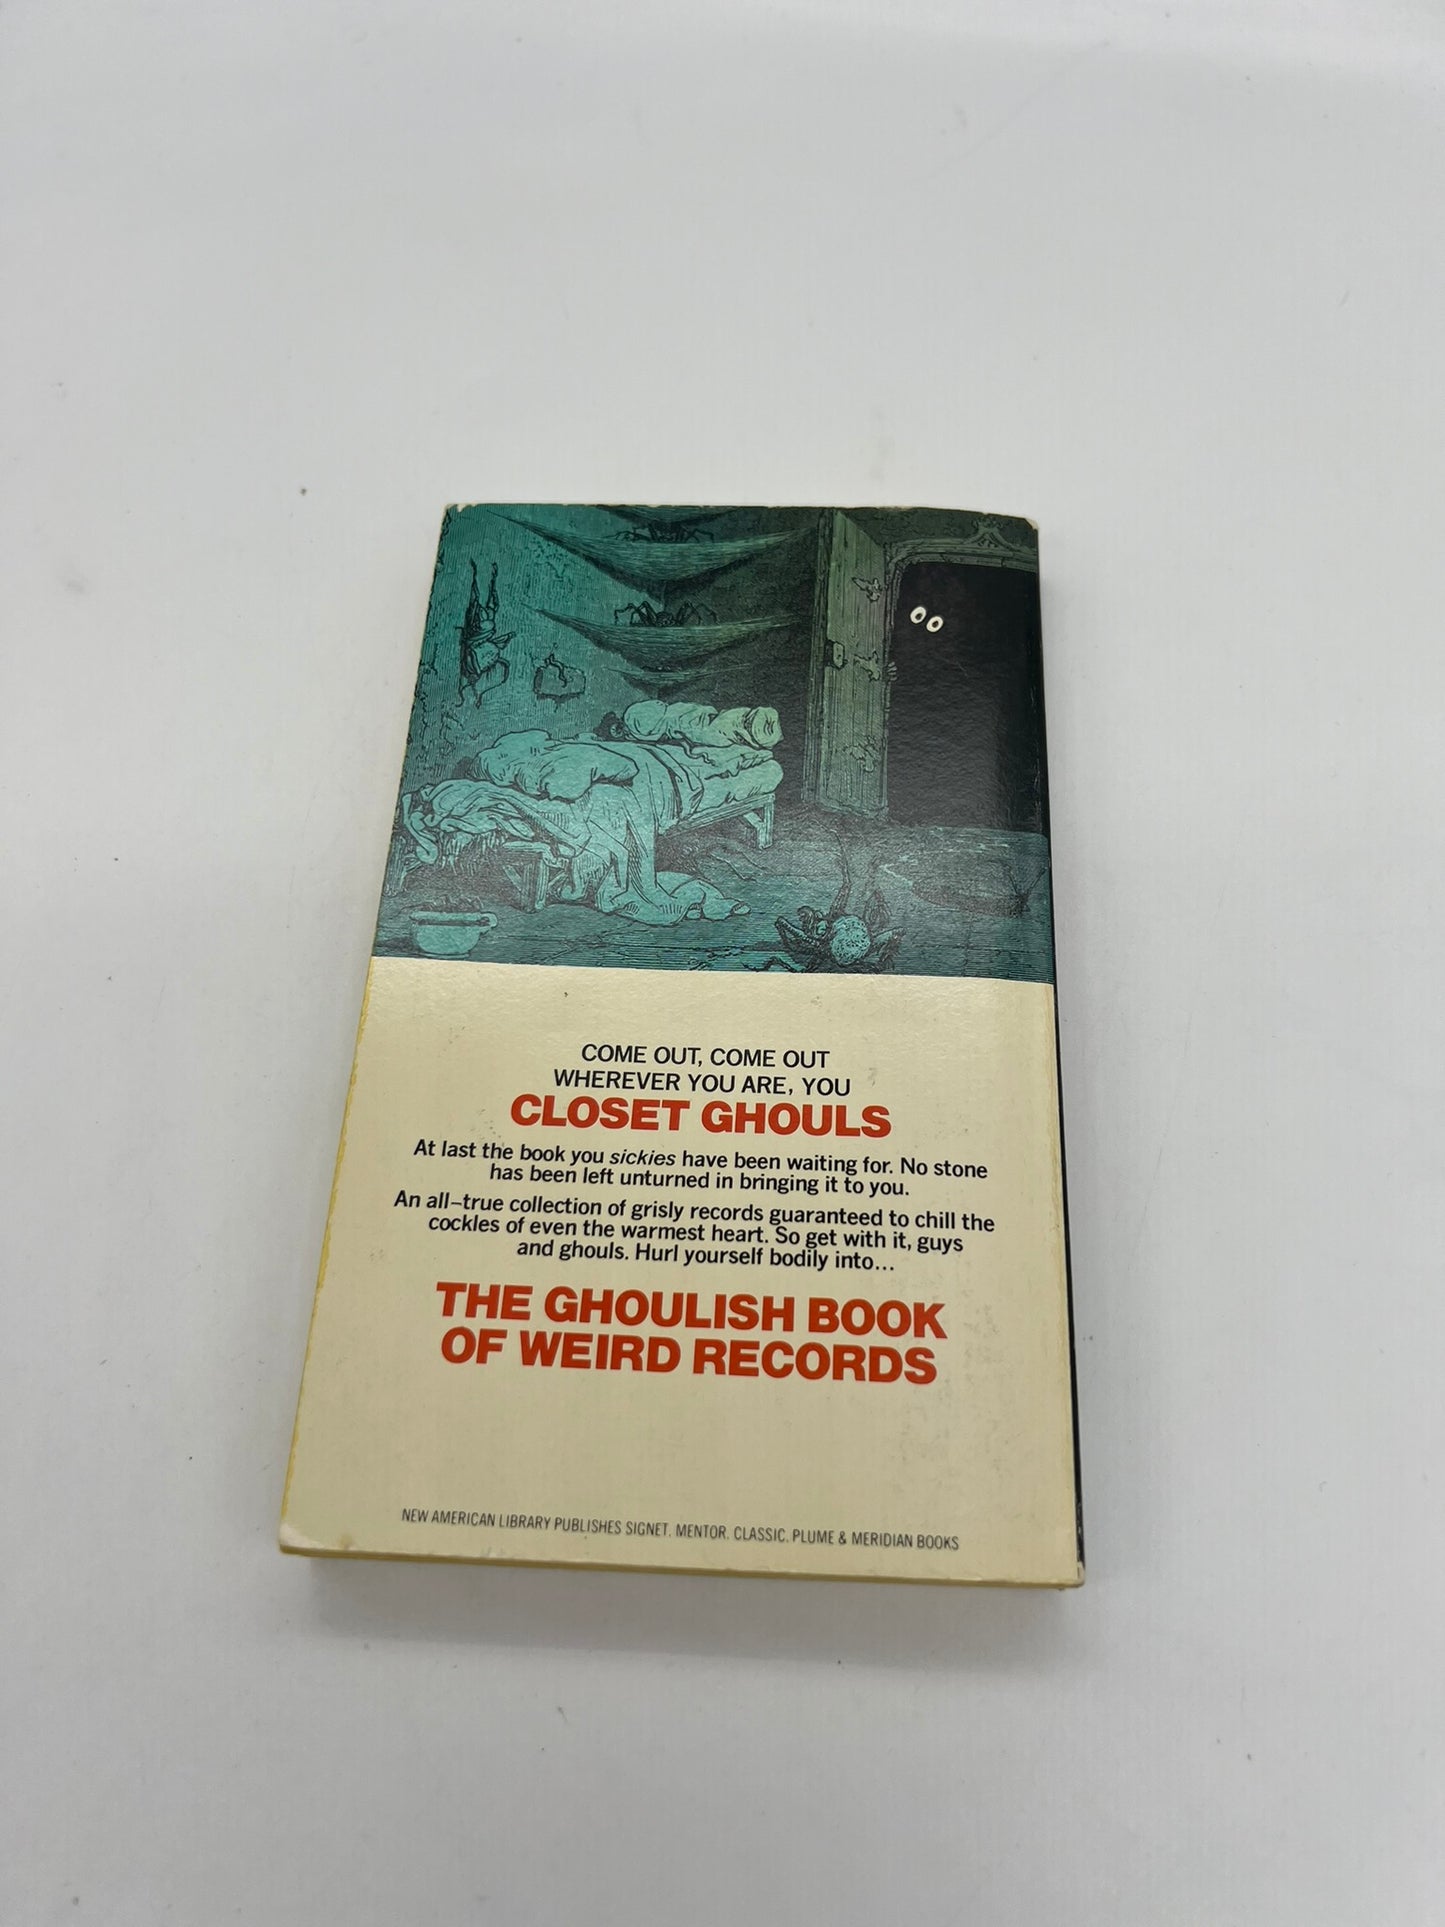 1979 The Ghoulish Book of Weird Records paperback book Al Jaffee